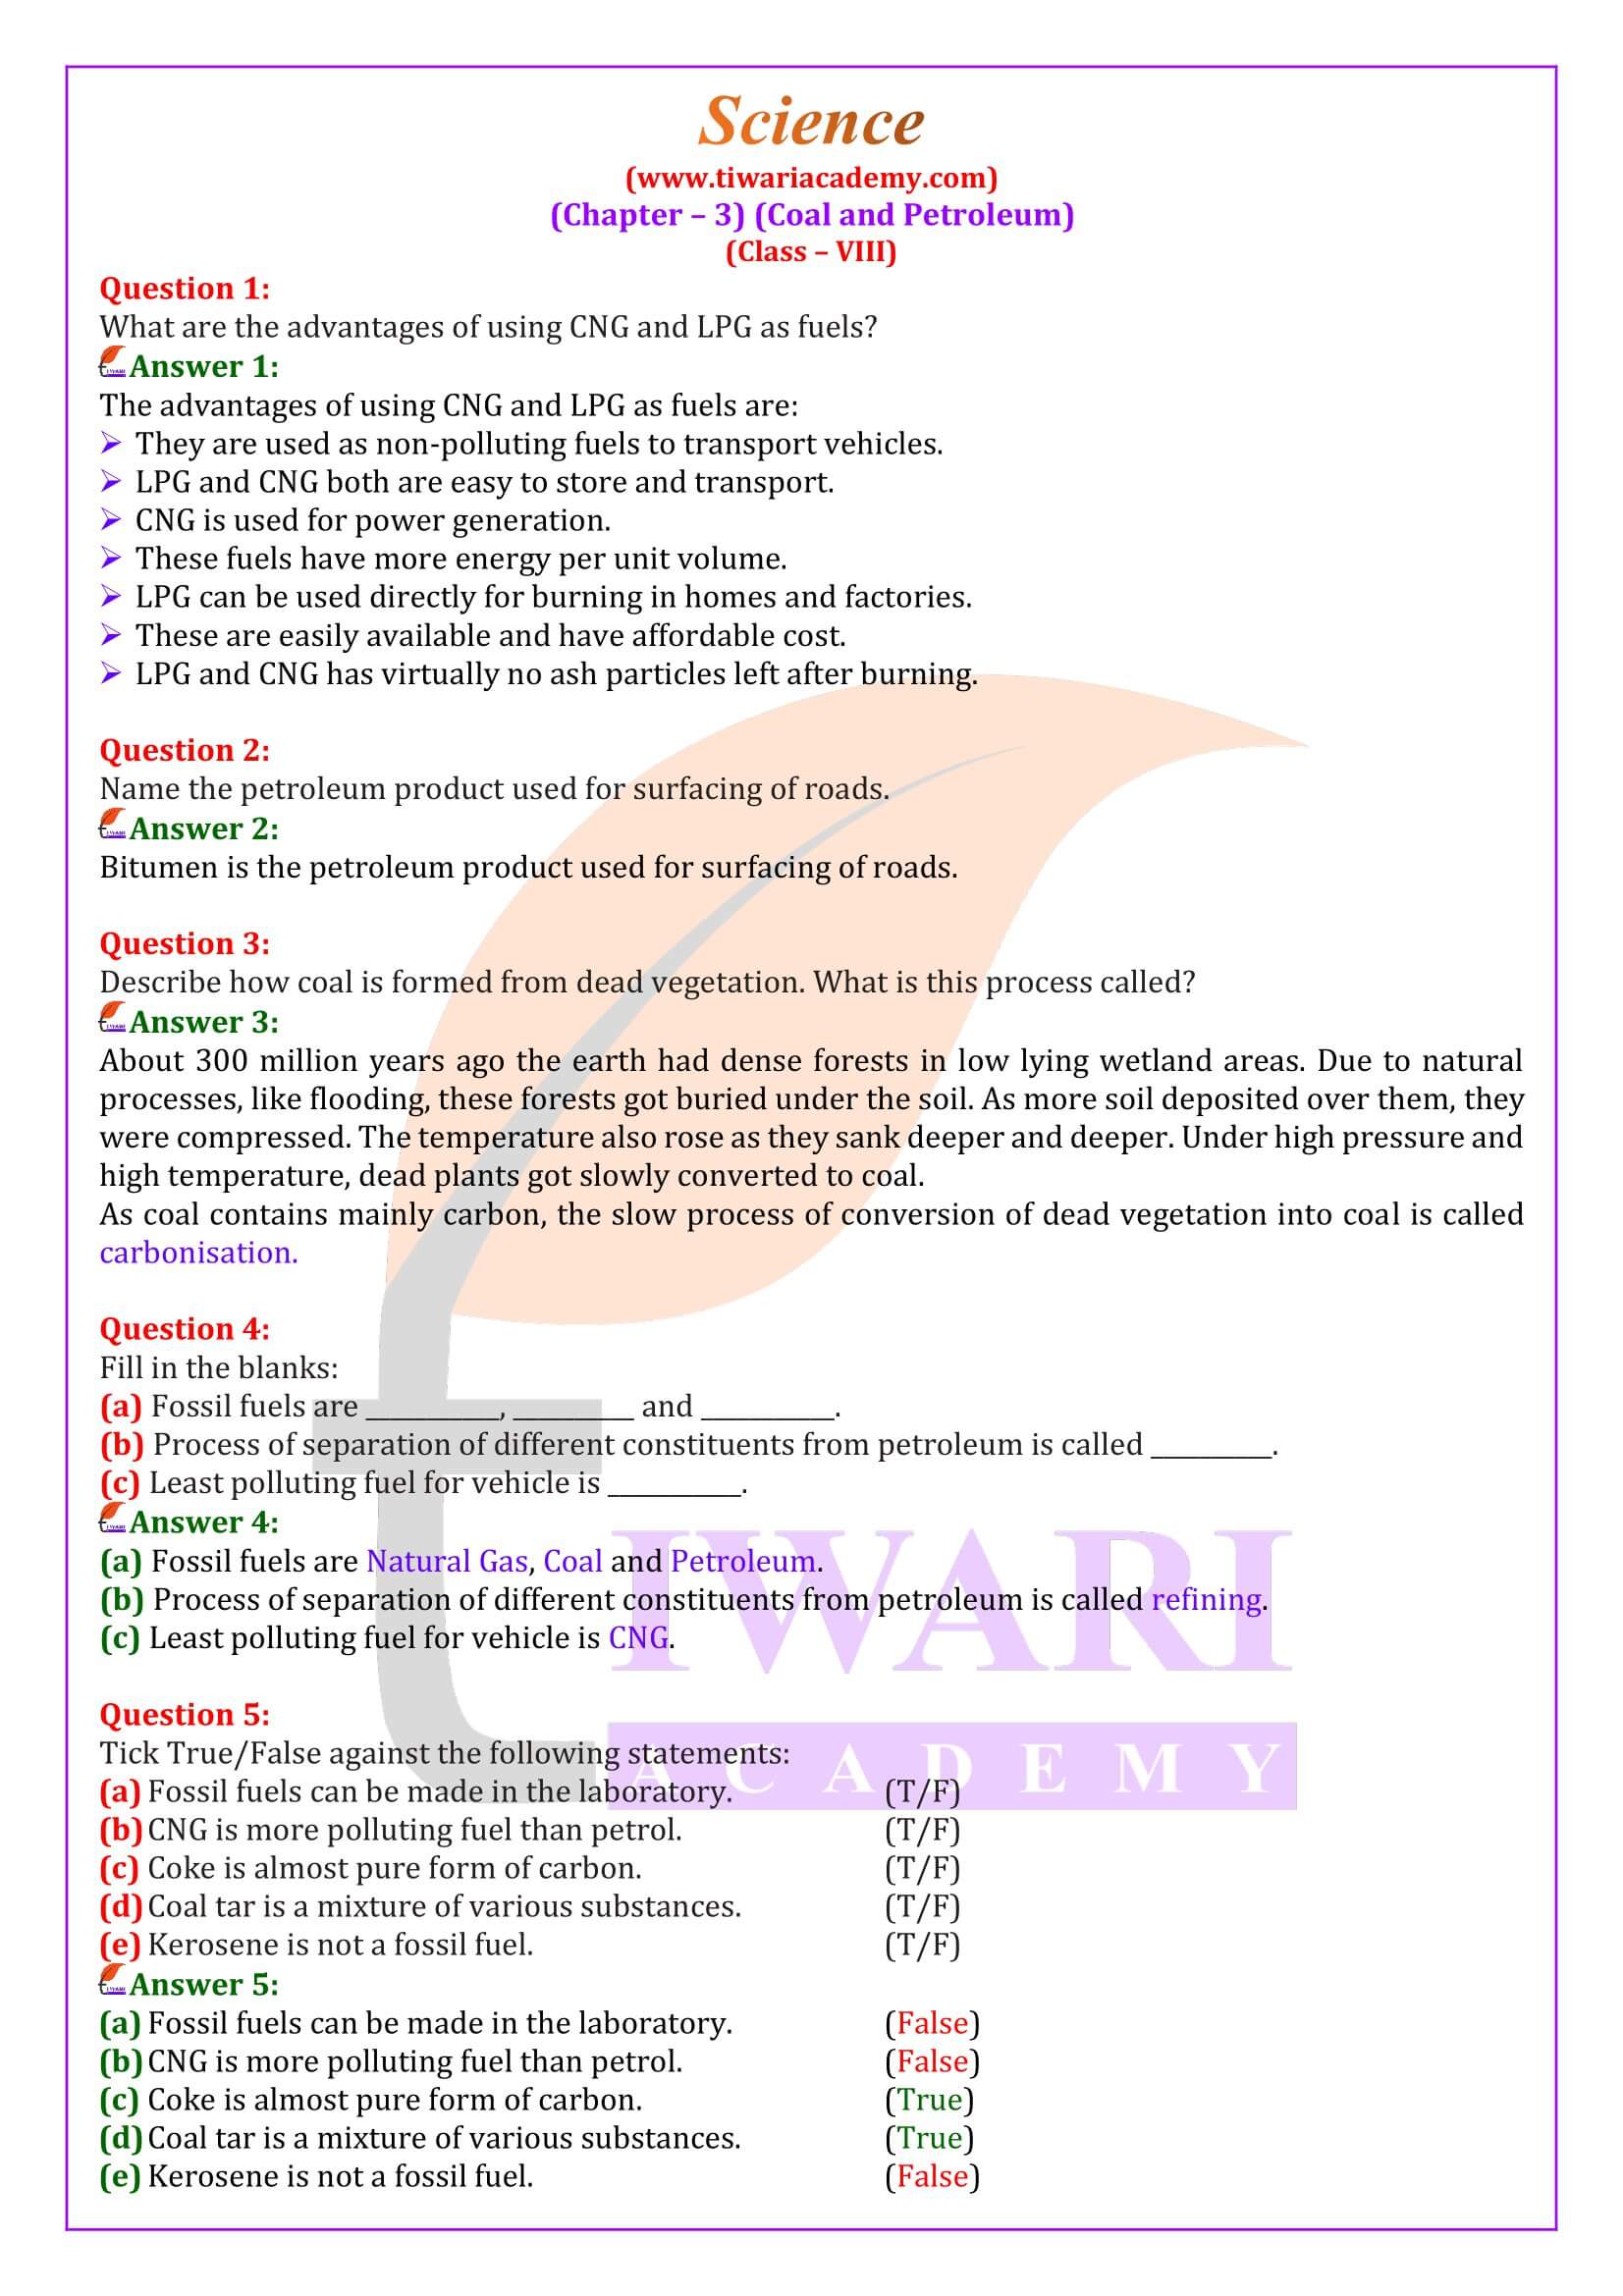 NCERT Solutions for Class 8 Science Chapter 3